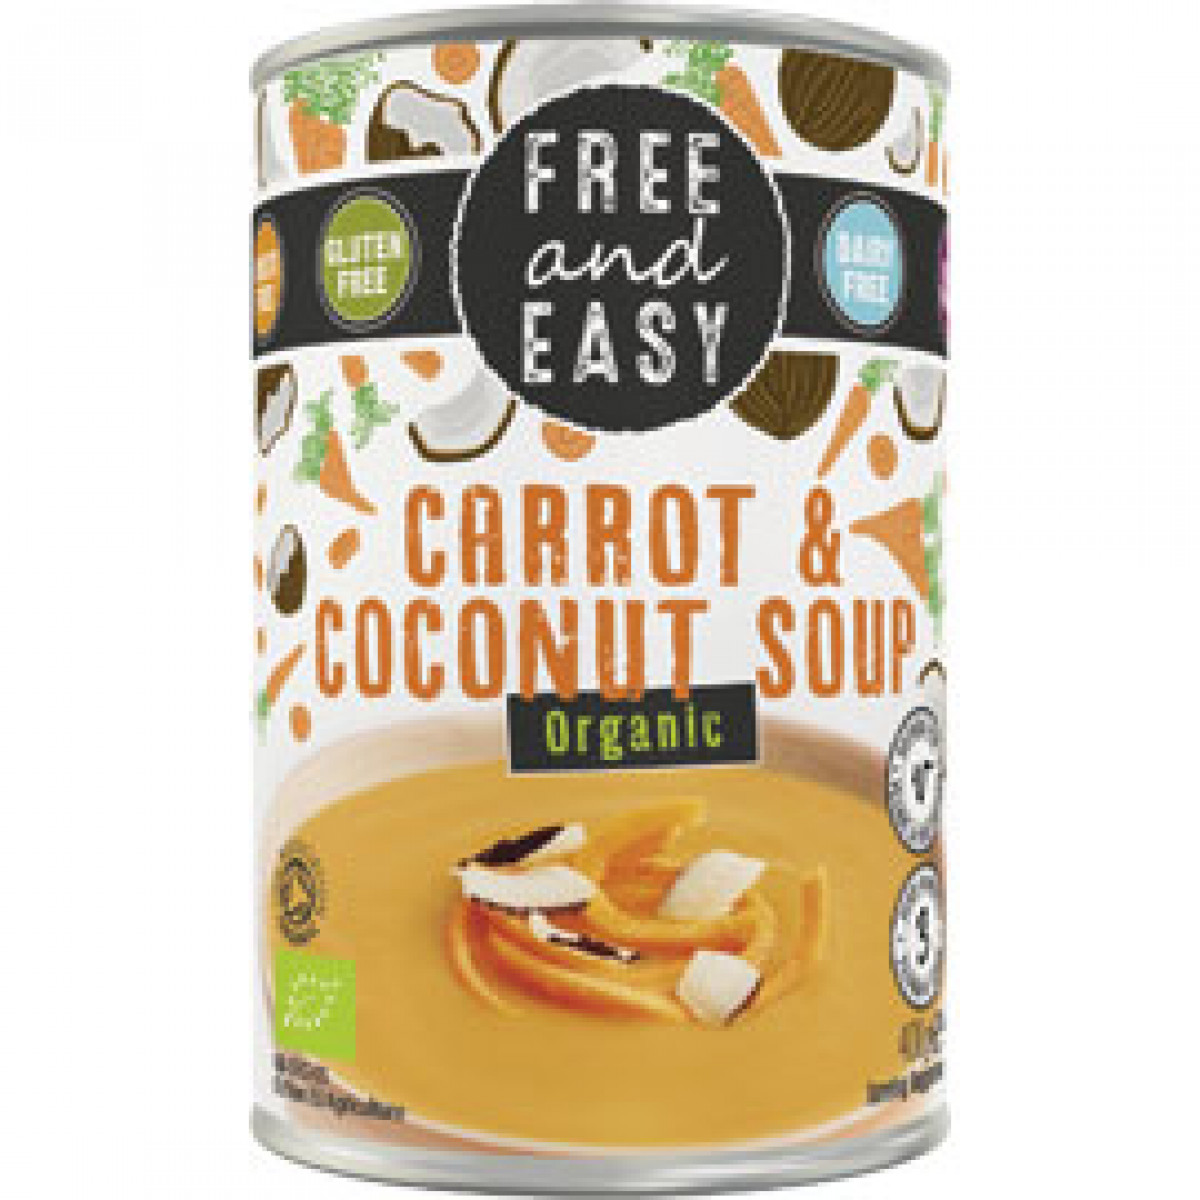 Product picture for Soup - Carrot & Coconut